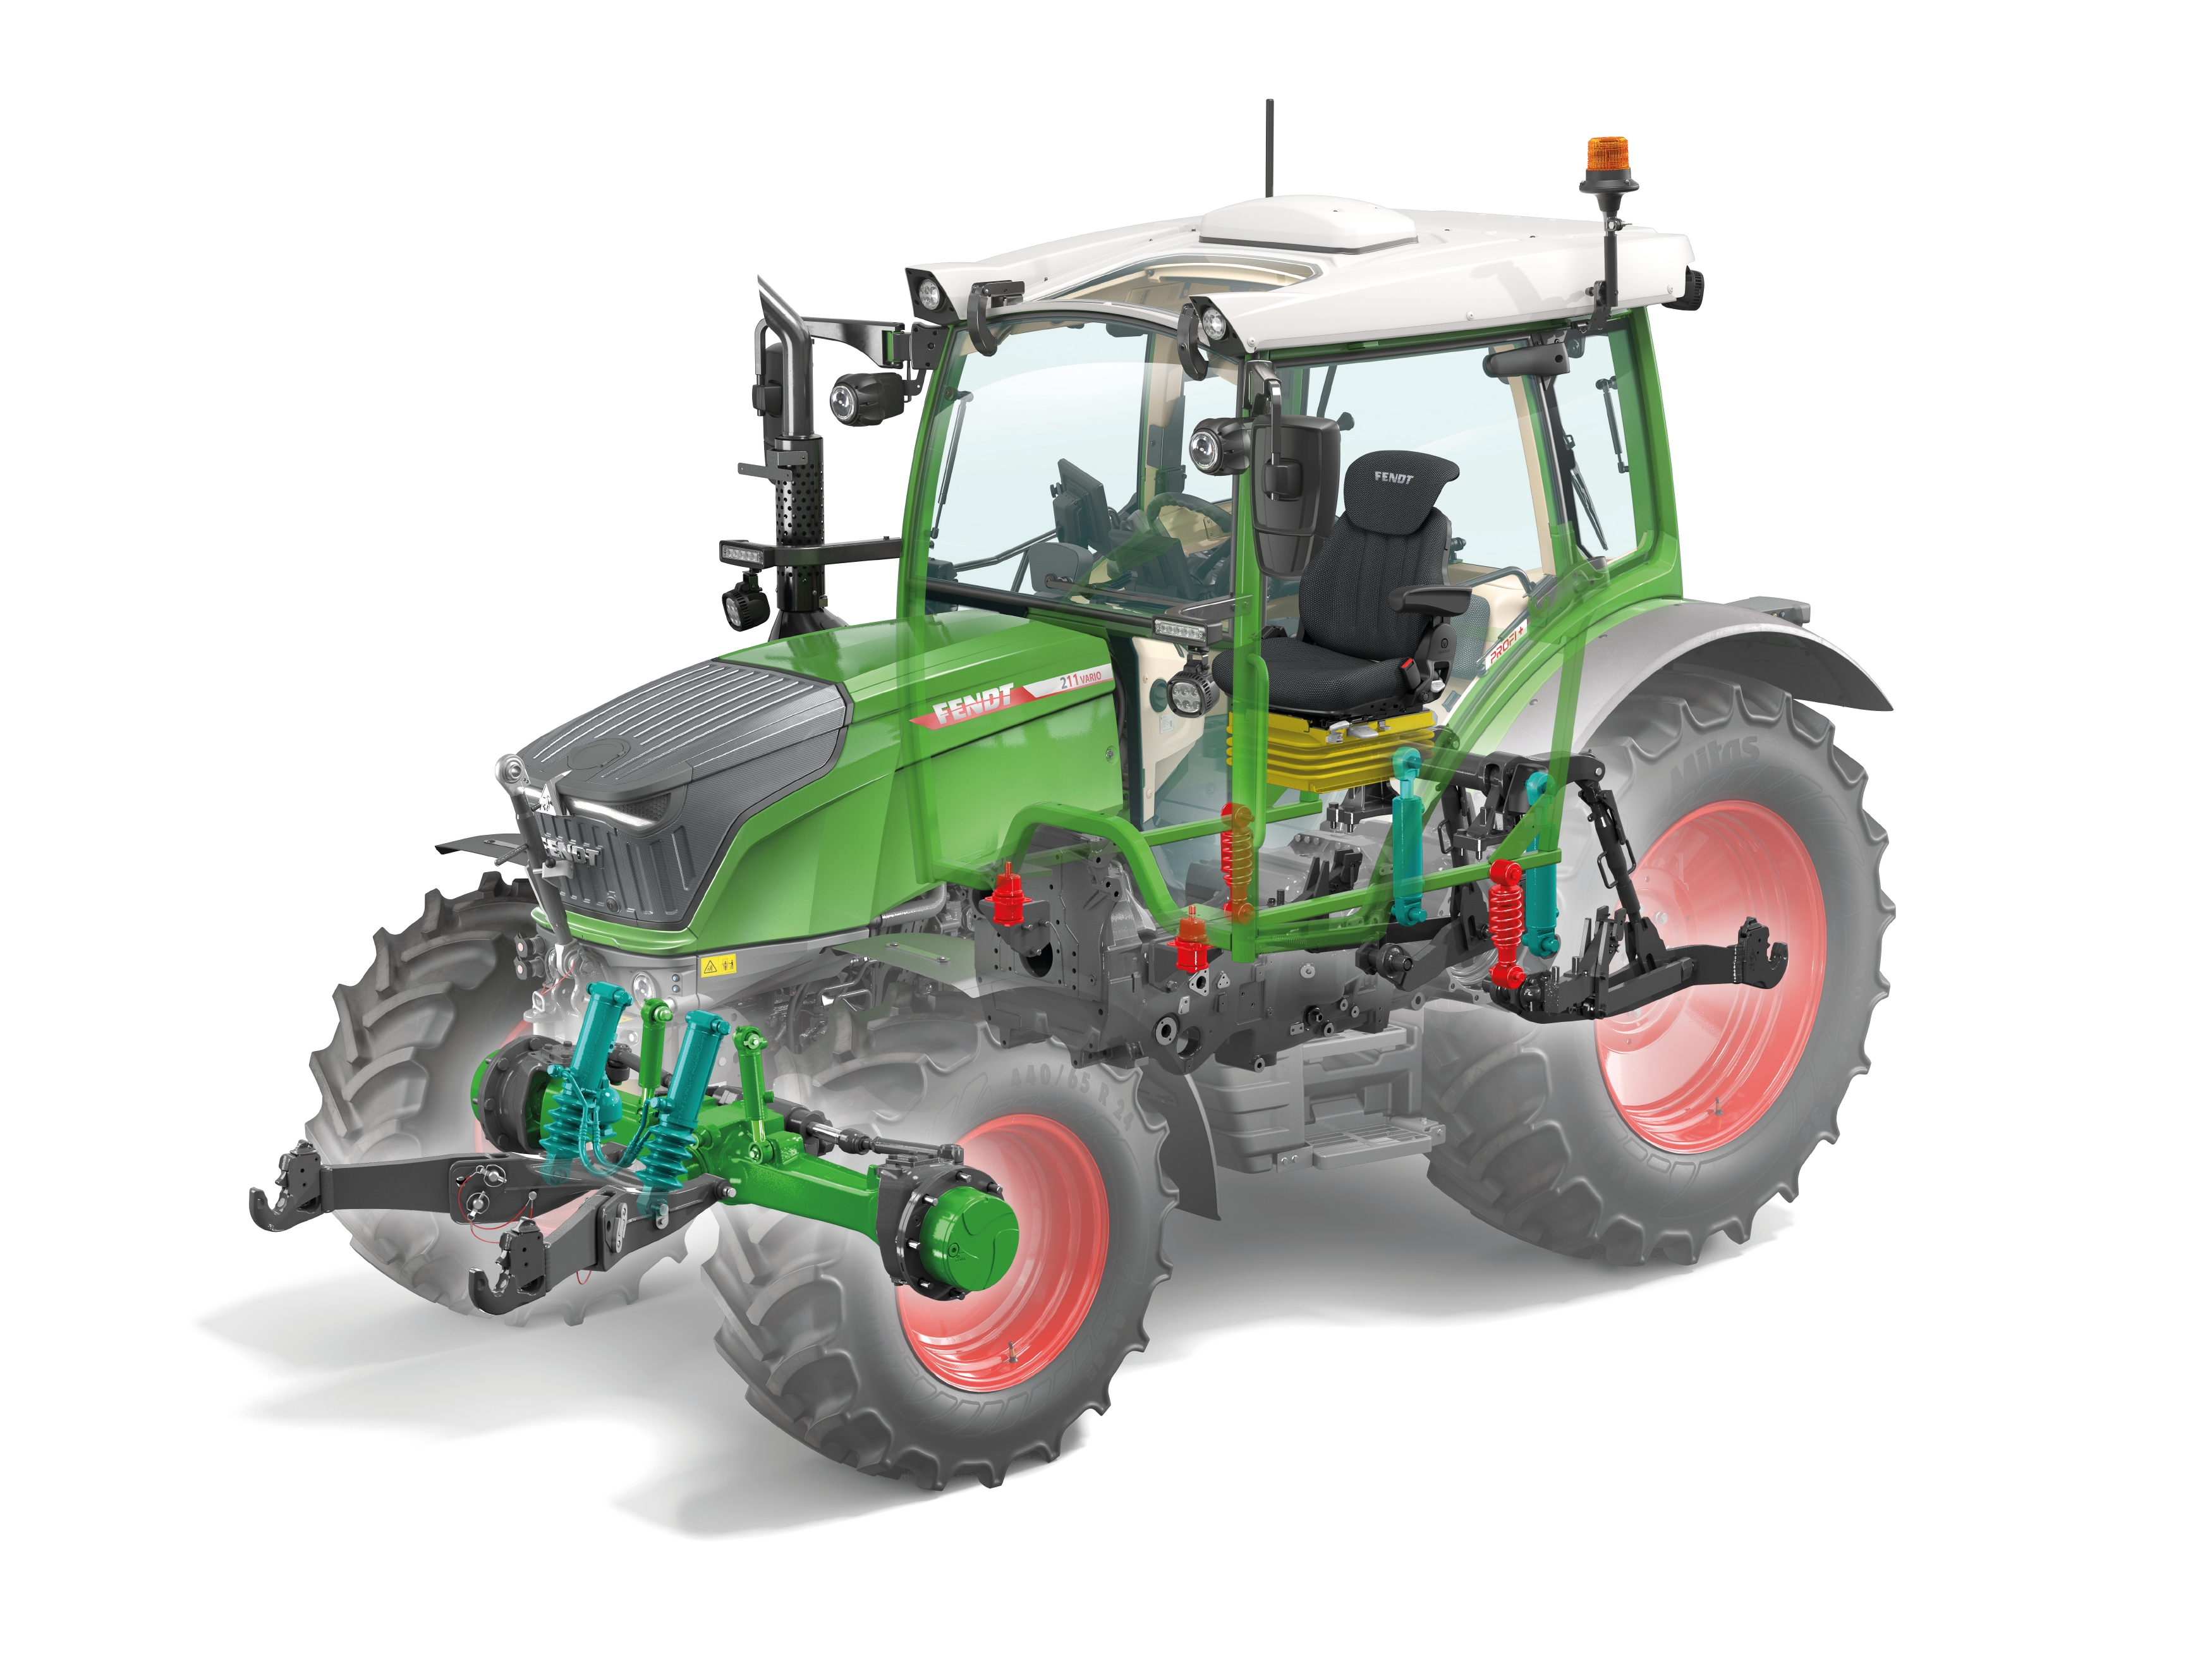 https://cdn.continental.com/fileadmin/__imported/sites/corporate/_international/english/hubpages/10_20press/01_press_releases/08_20contitech/2022/continental_pp_fendt_tractor2.jpg